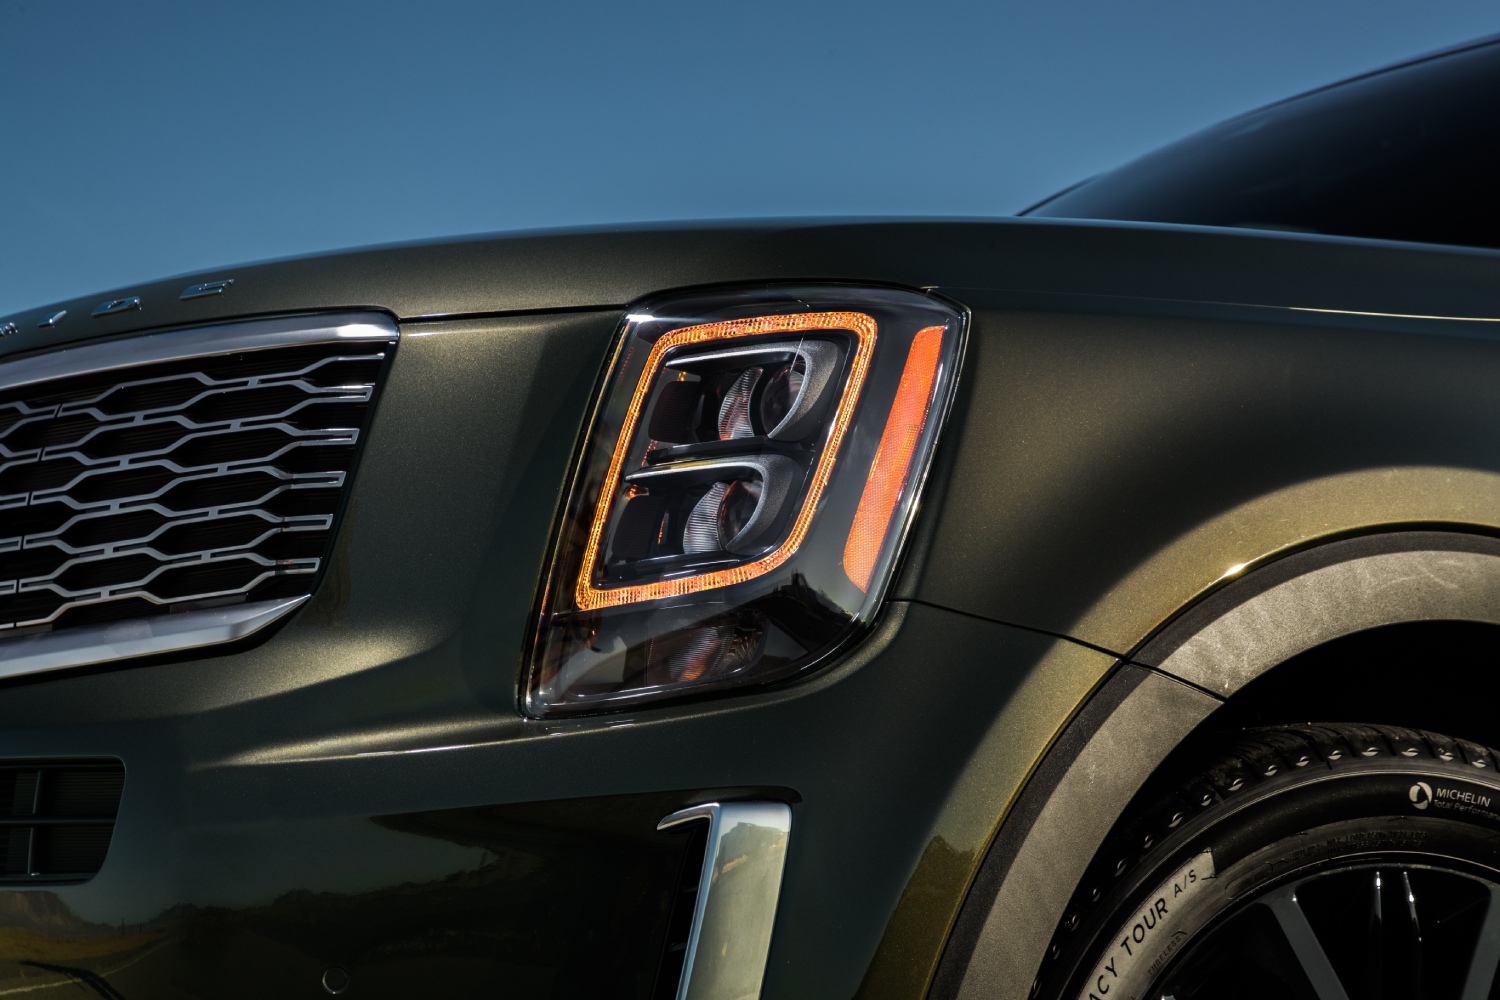 Some of the 2022 Kia Telluride problems include these headlights